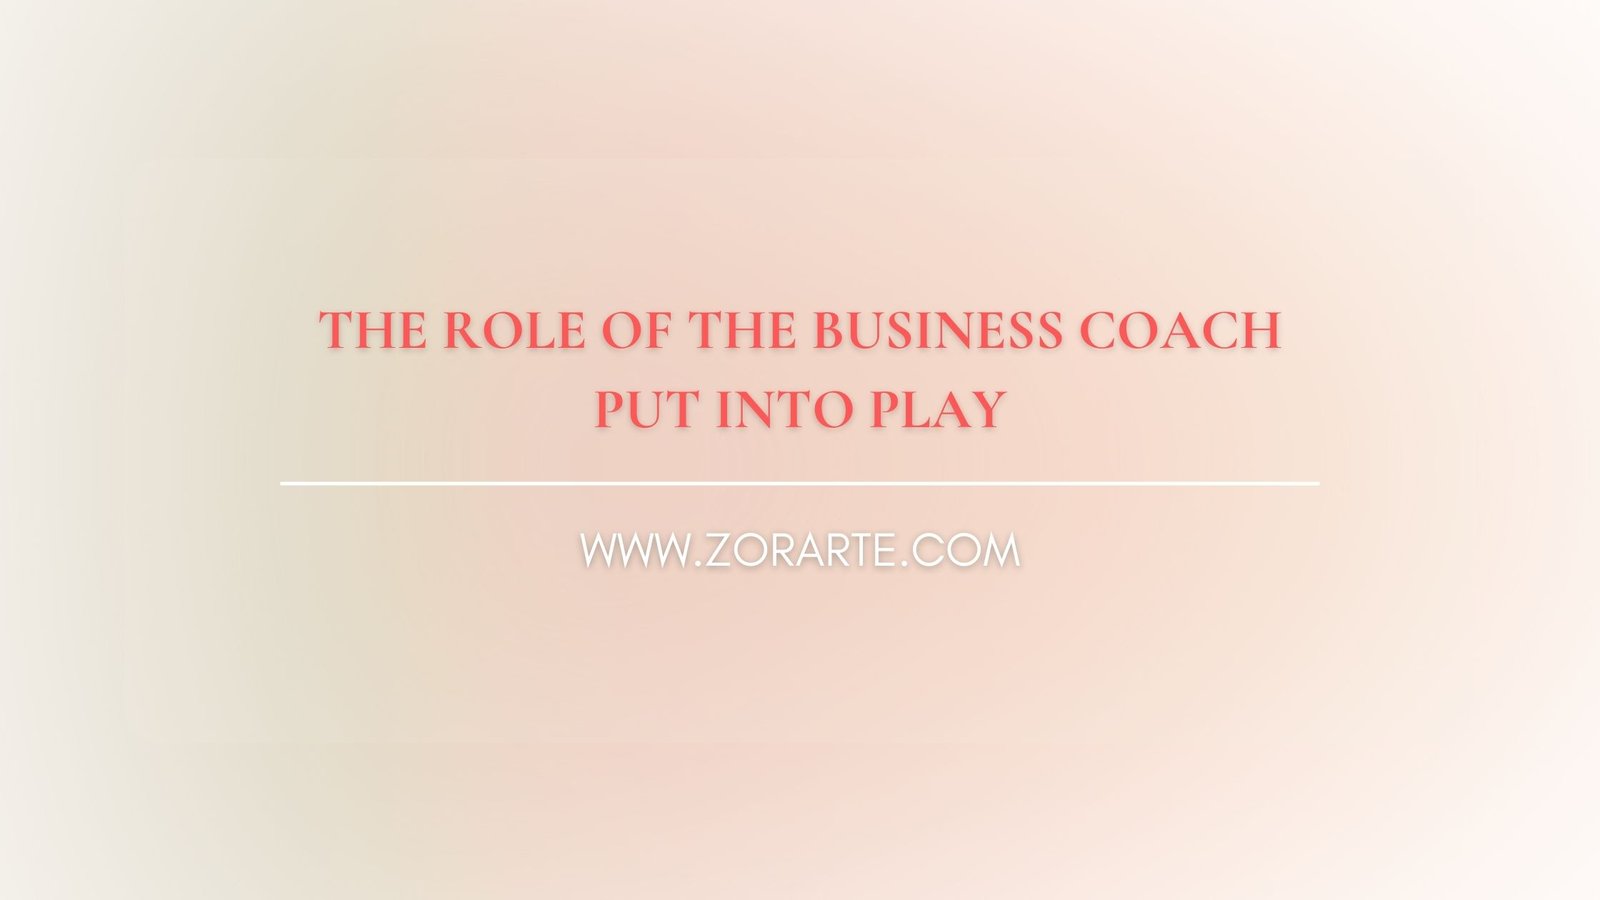 The Role of the Business Coach Put into Play